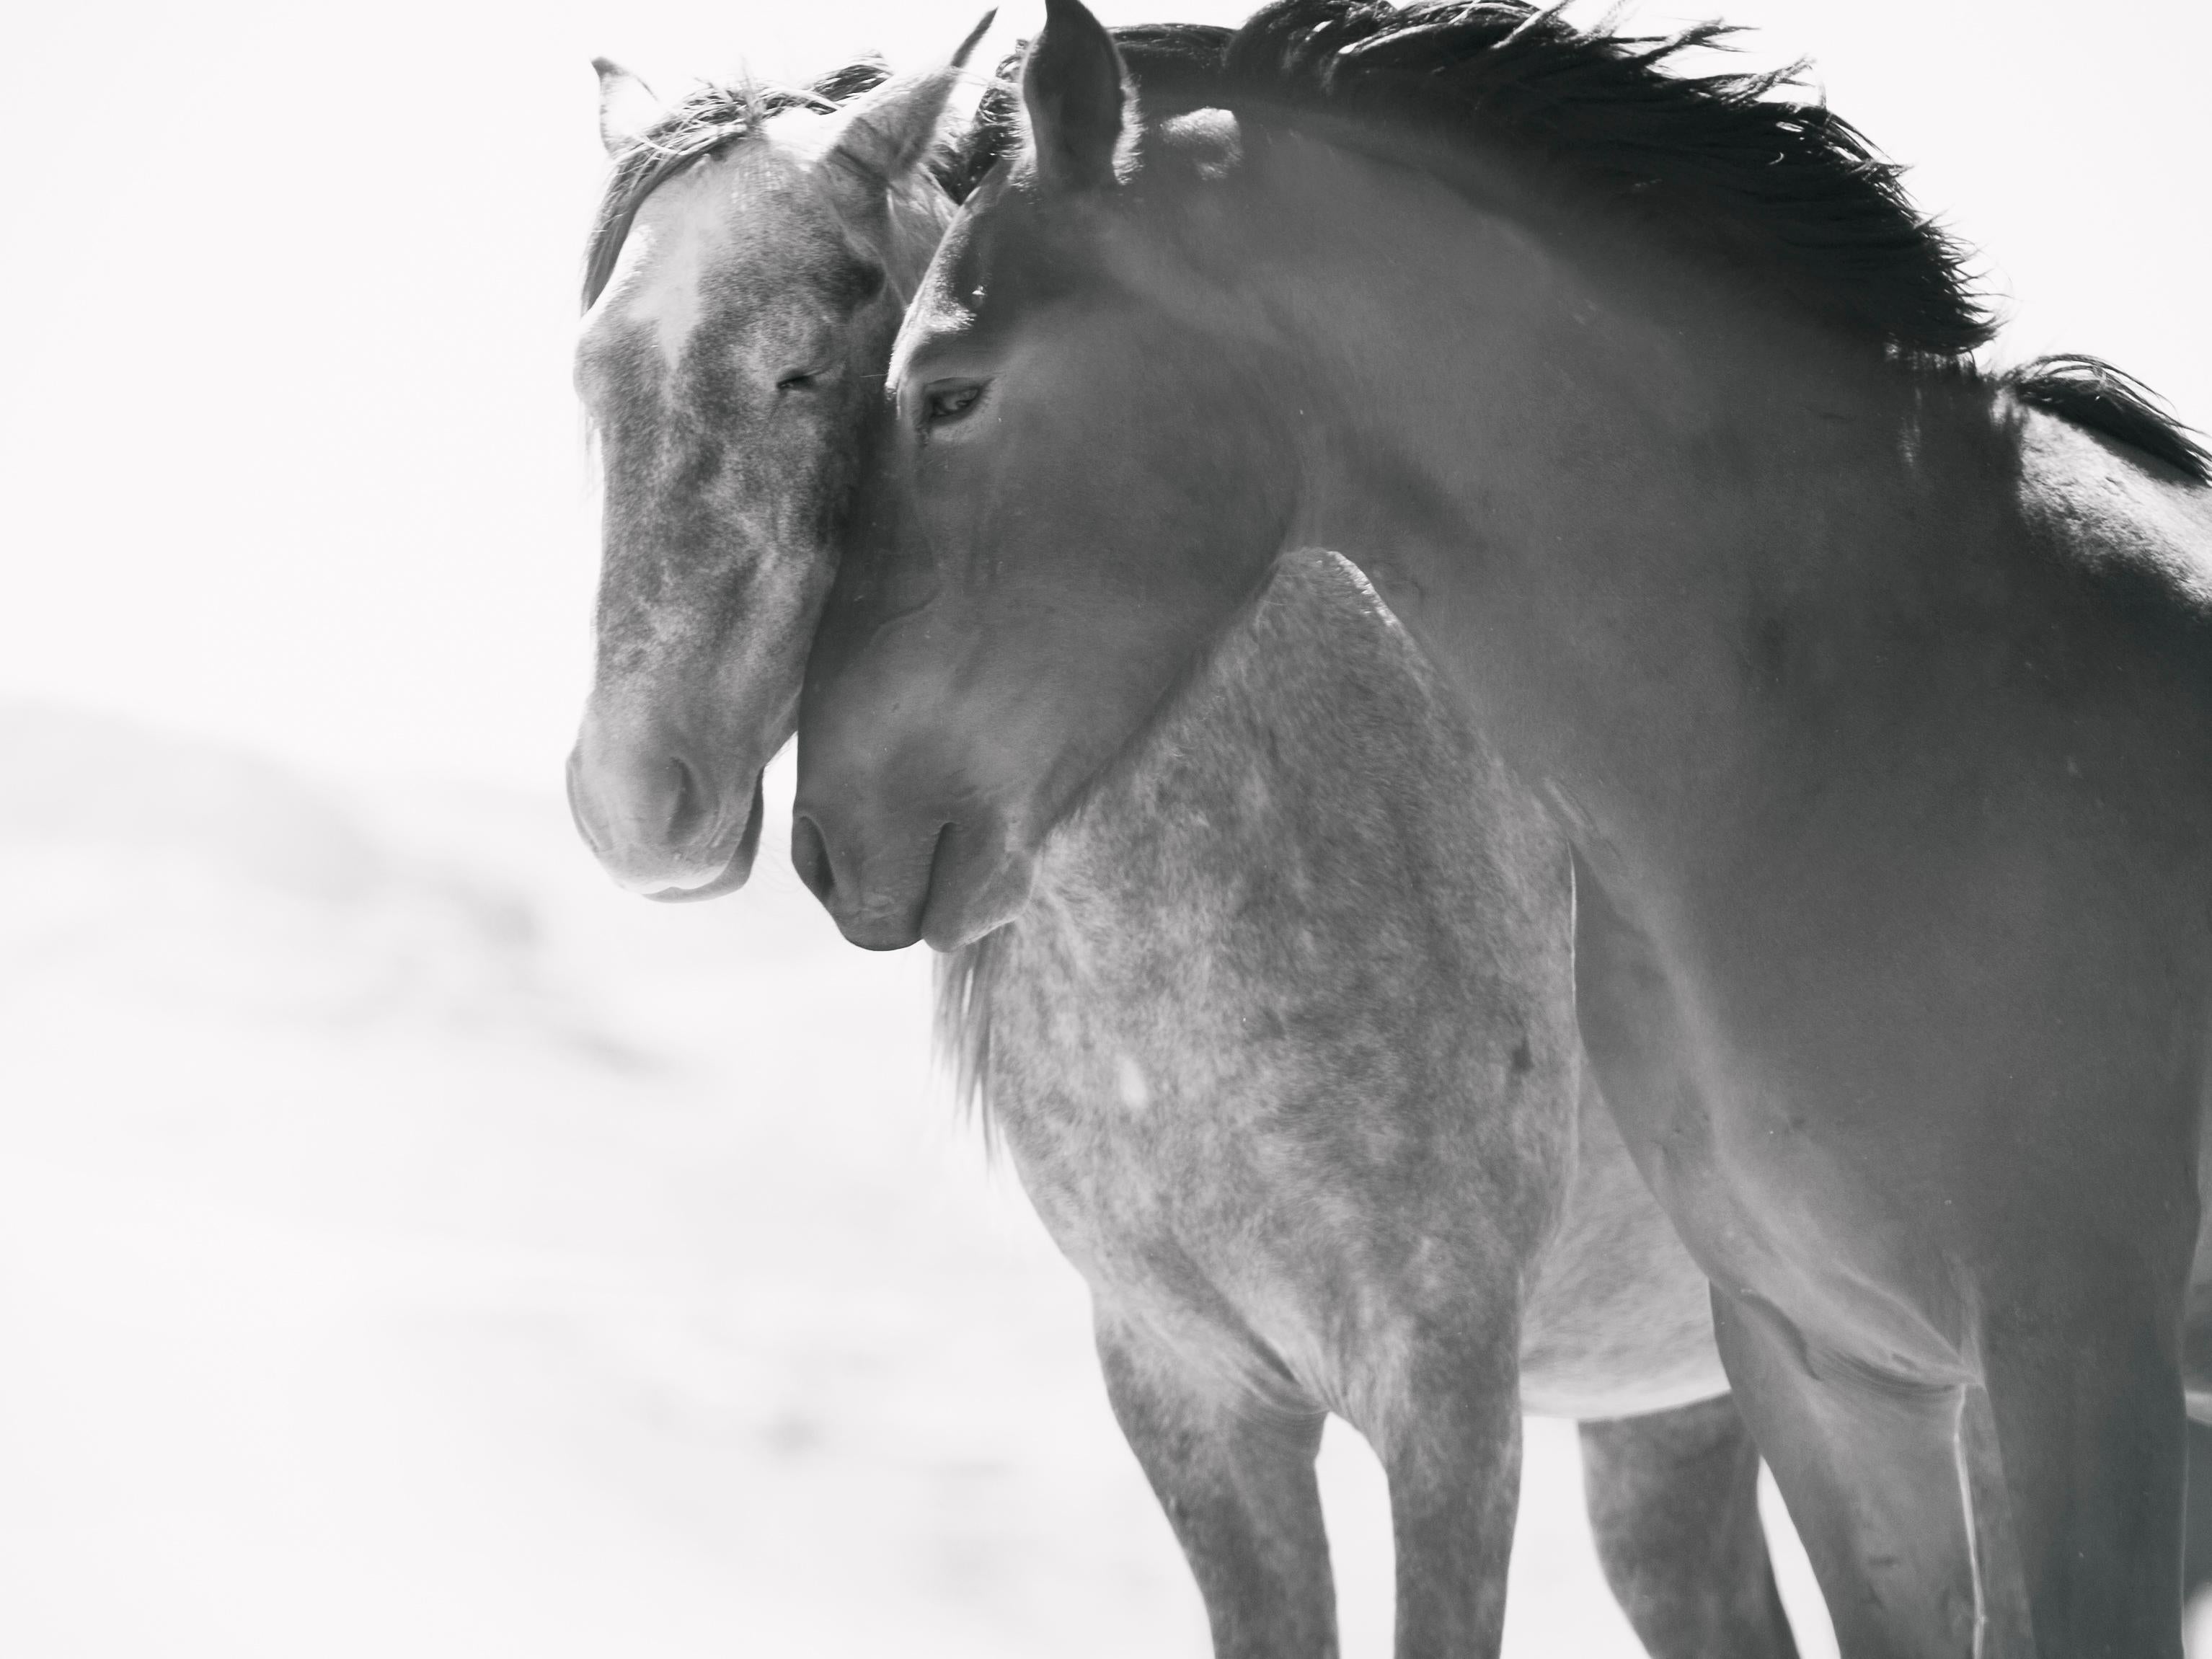 Shane Russeck Animal Print - "Soulmates" 30x40  Black and White Photography  Wild Horses Mustangs Photograph 